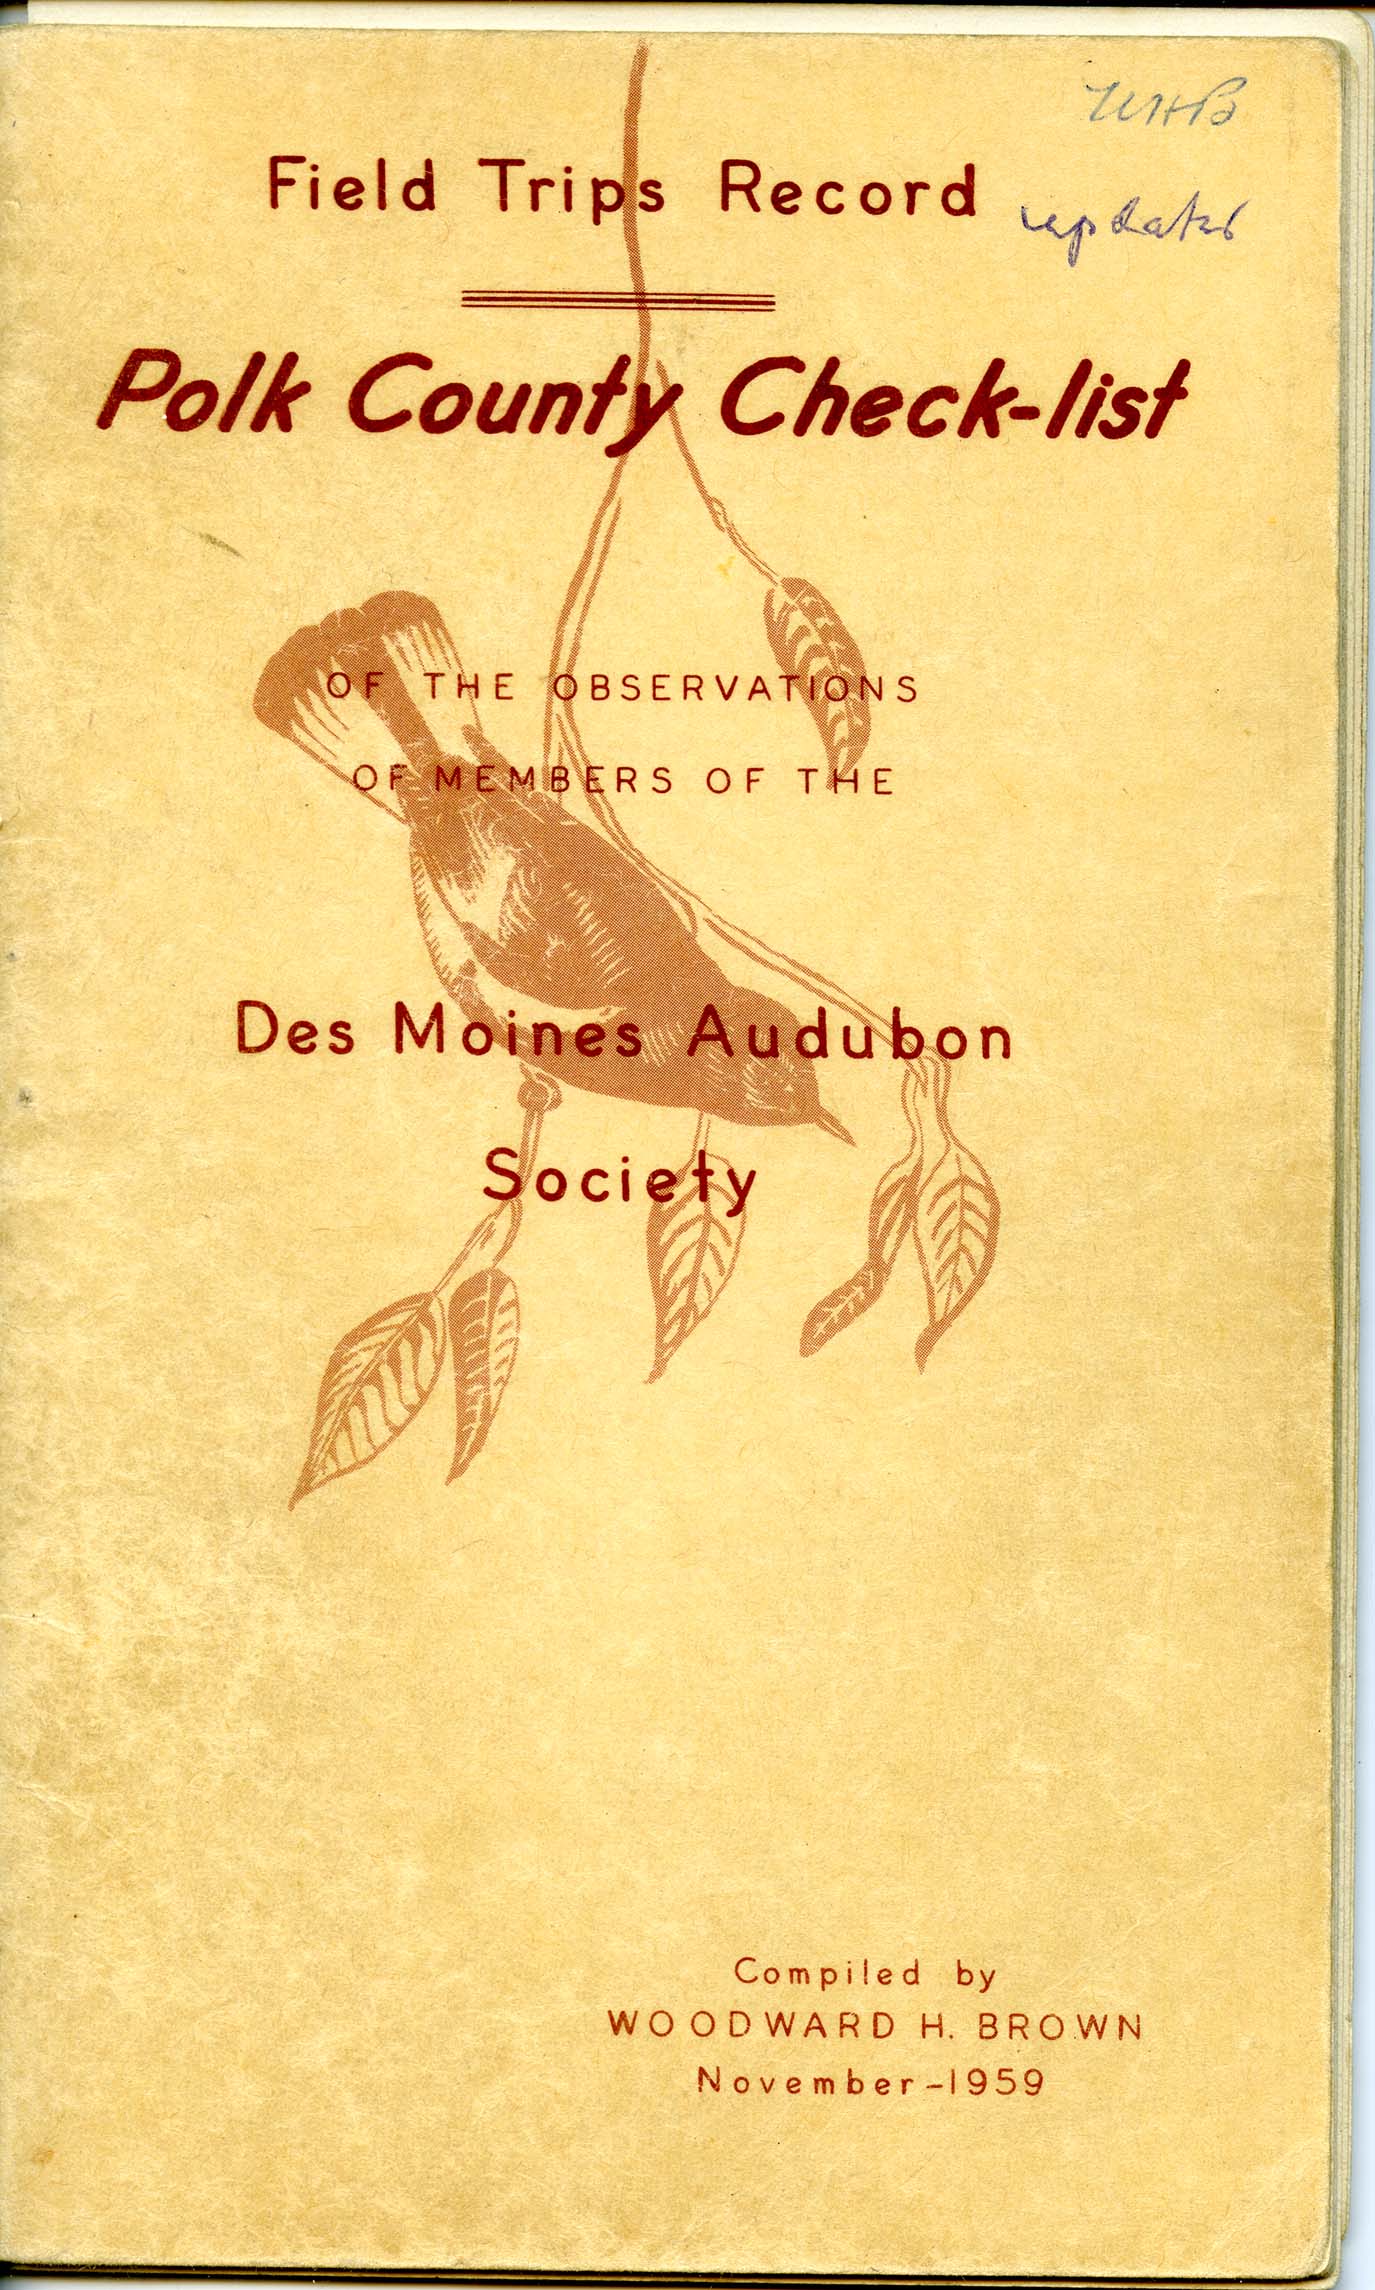 Annotated copy of Polk County check-list of the observations of members of the Des Moines Audubon Society, 1959